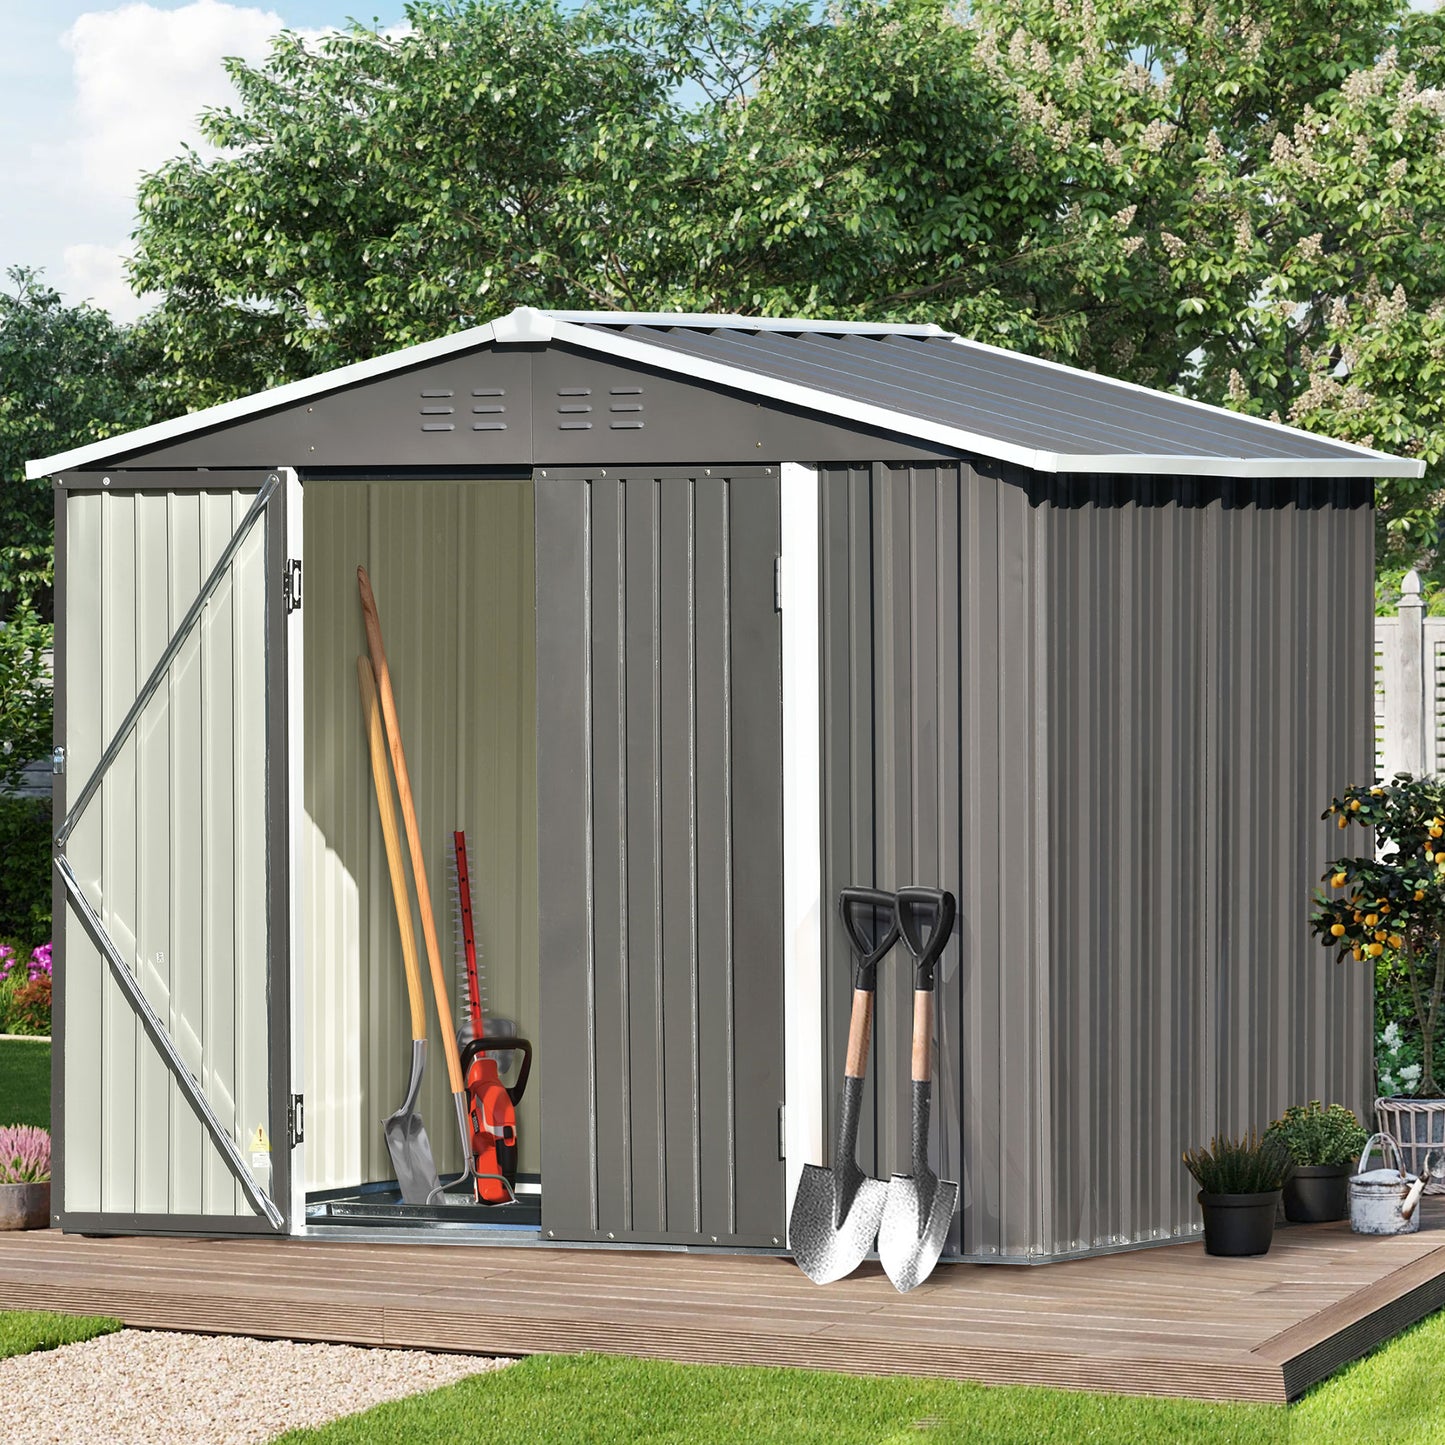 6' x 4' Outdoor Storage Shed, Metal Garden Shed with Lockable Doors, Tools Storage Shed for Backyard, Patio, Lawn, D9129